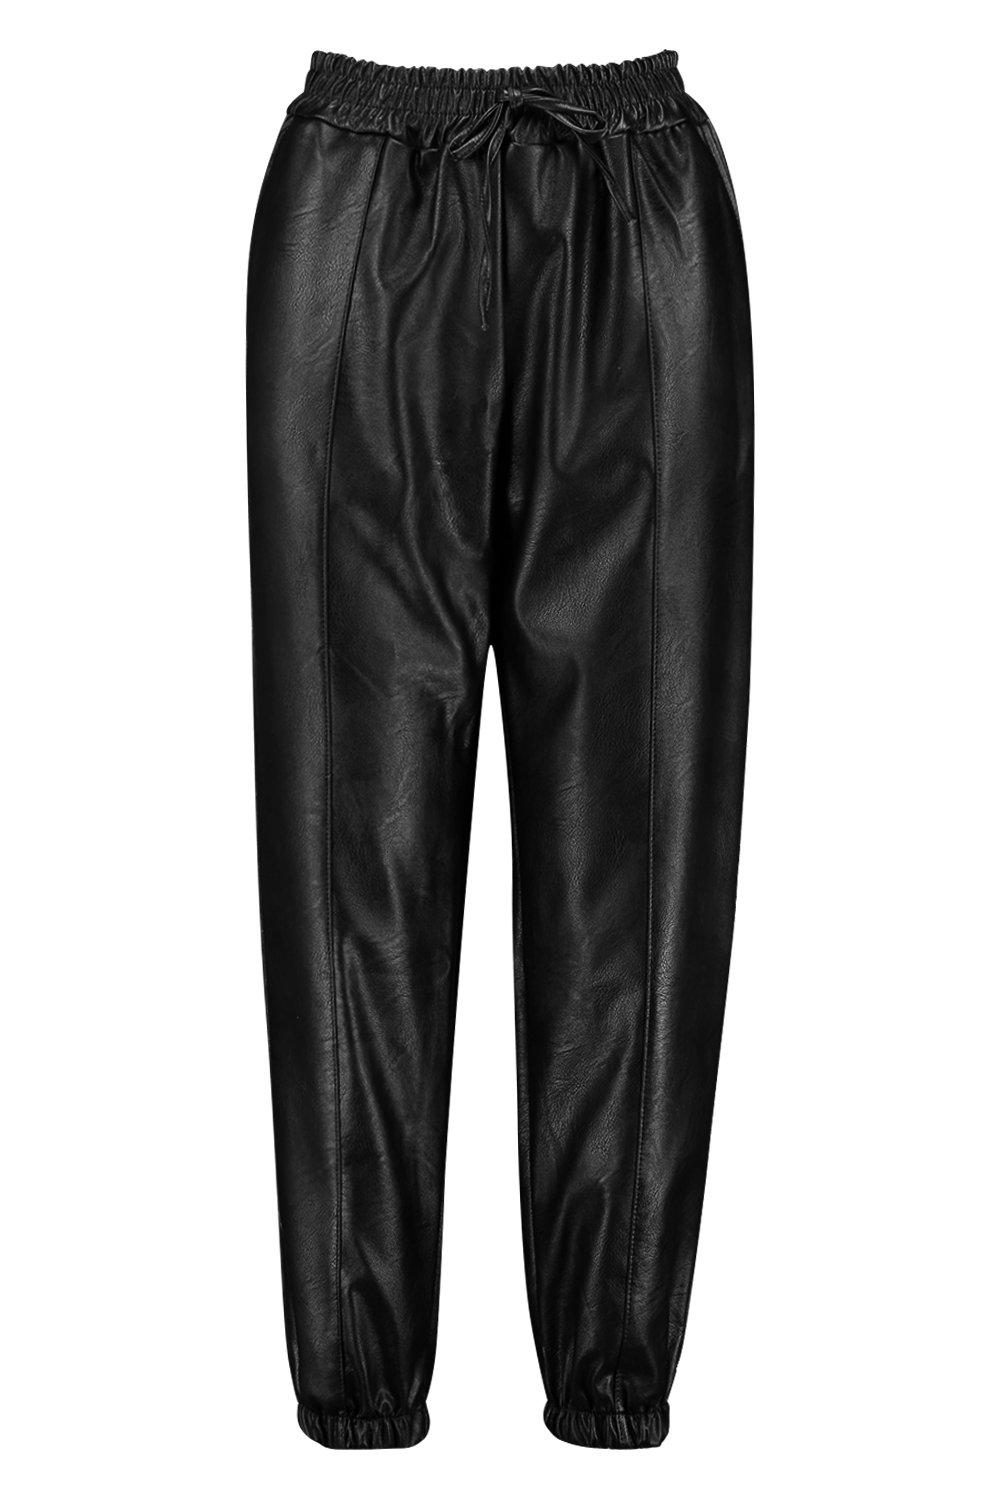 SEMATOMALA Women's PU Faux Leather Joggers Drawstring High Waist Hip Hop  Trousers Cropped Beam Foot Jogging Pants with Pockets(BL,S) Black at   Women's Clothing store